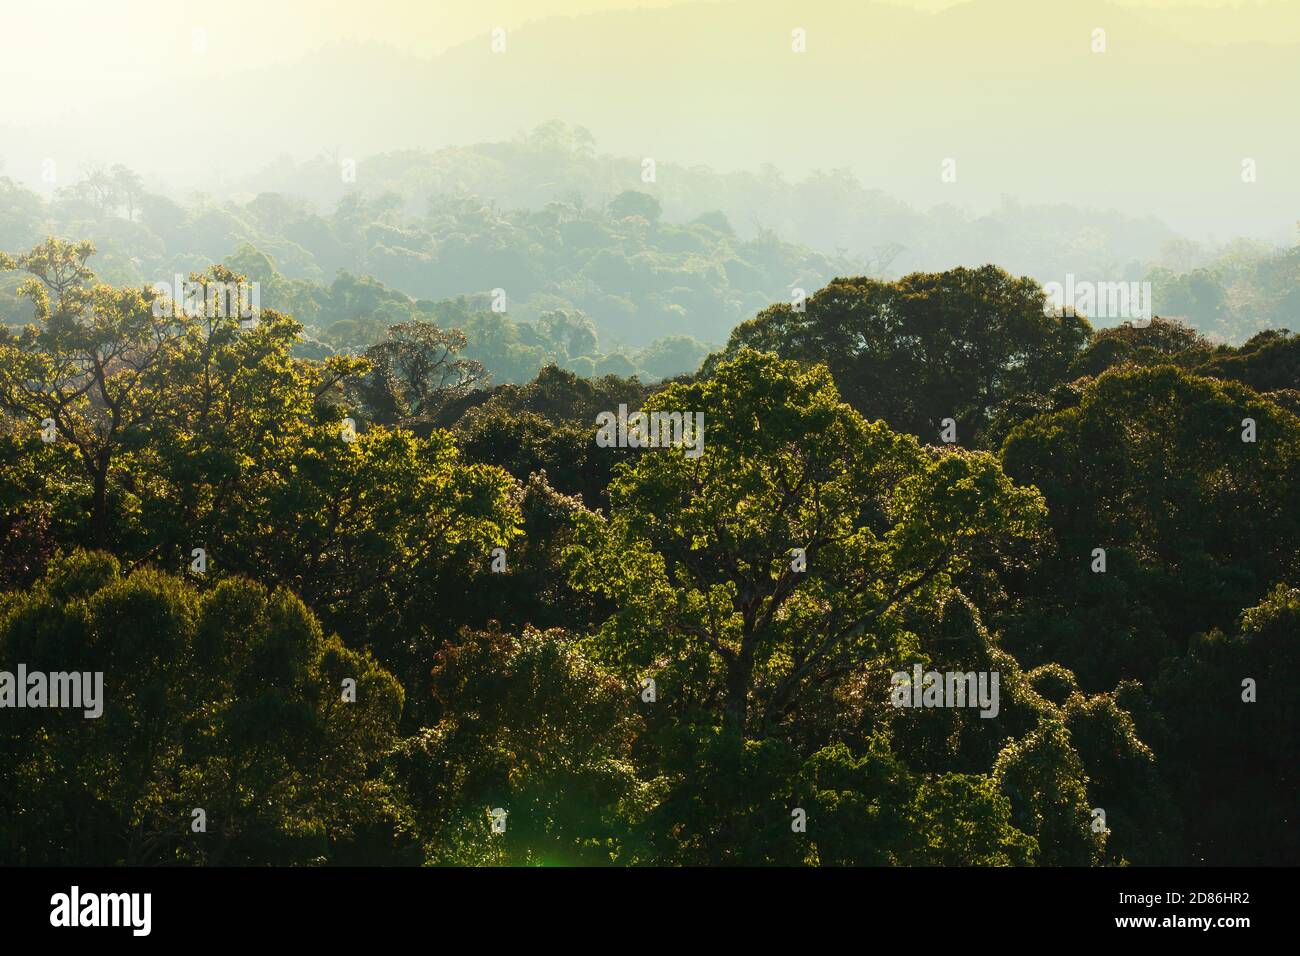 Aerial view of Himalayas mountains and green forest canopy at sunrise. Focus on canopy. Stock Photo